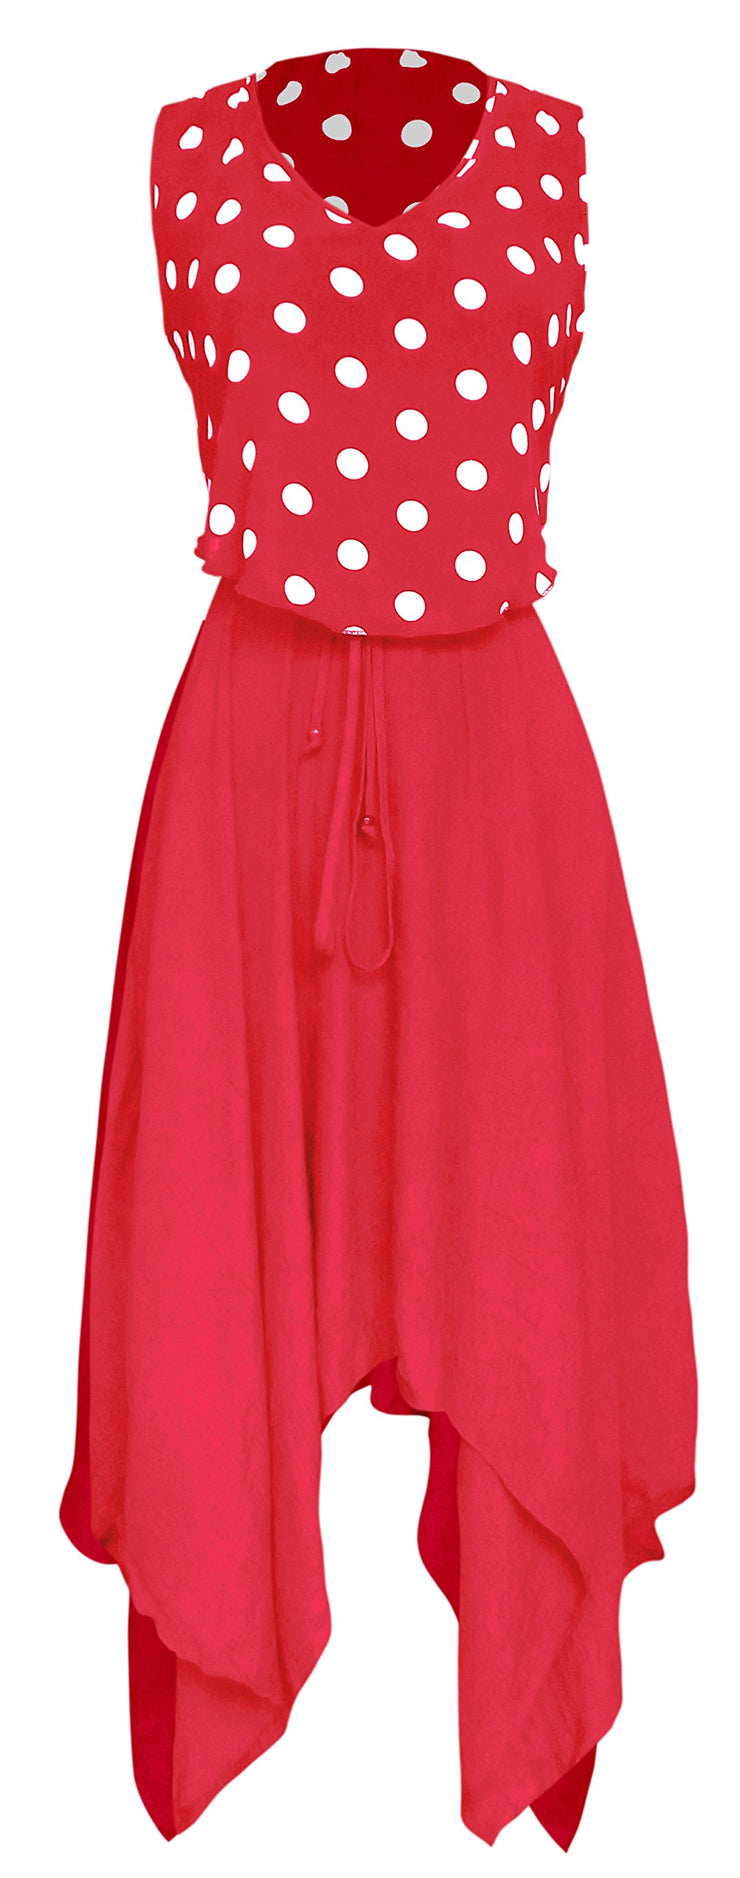 Women's Casual 2 in 1 Polka Dot Flowing Handkerchief Dress (Coral, X-Large)